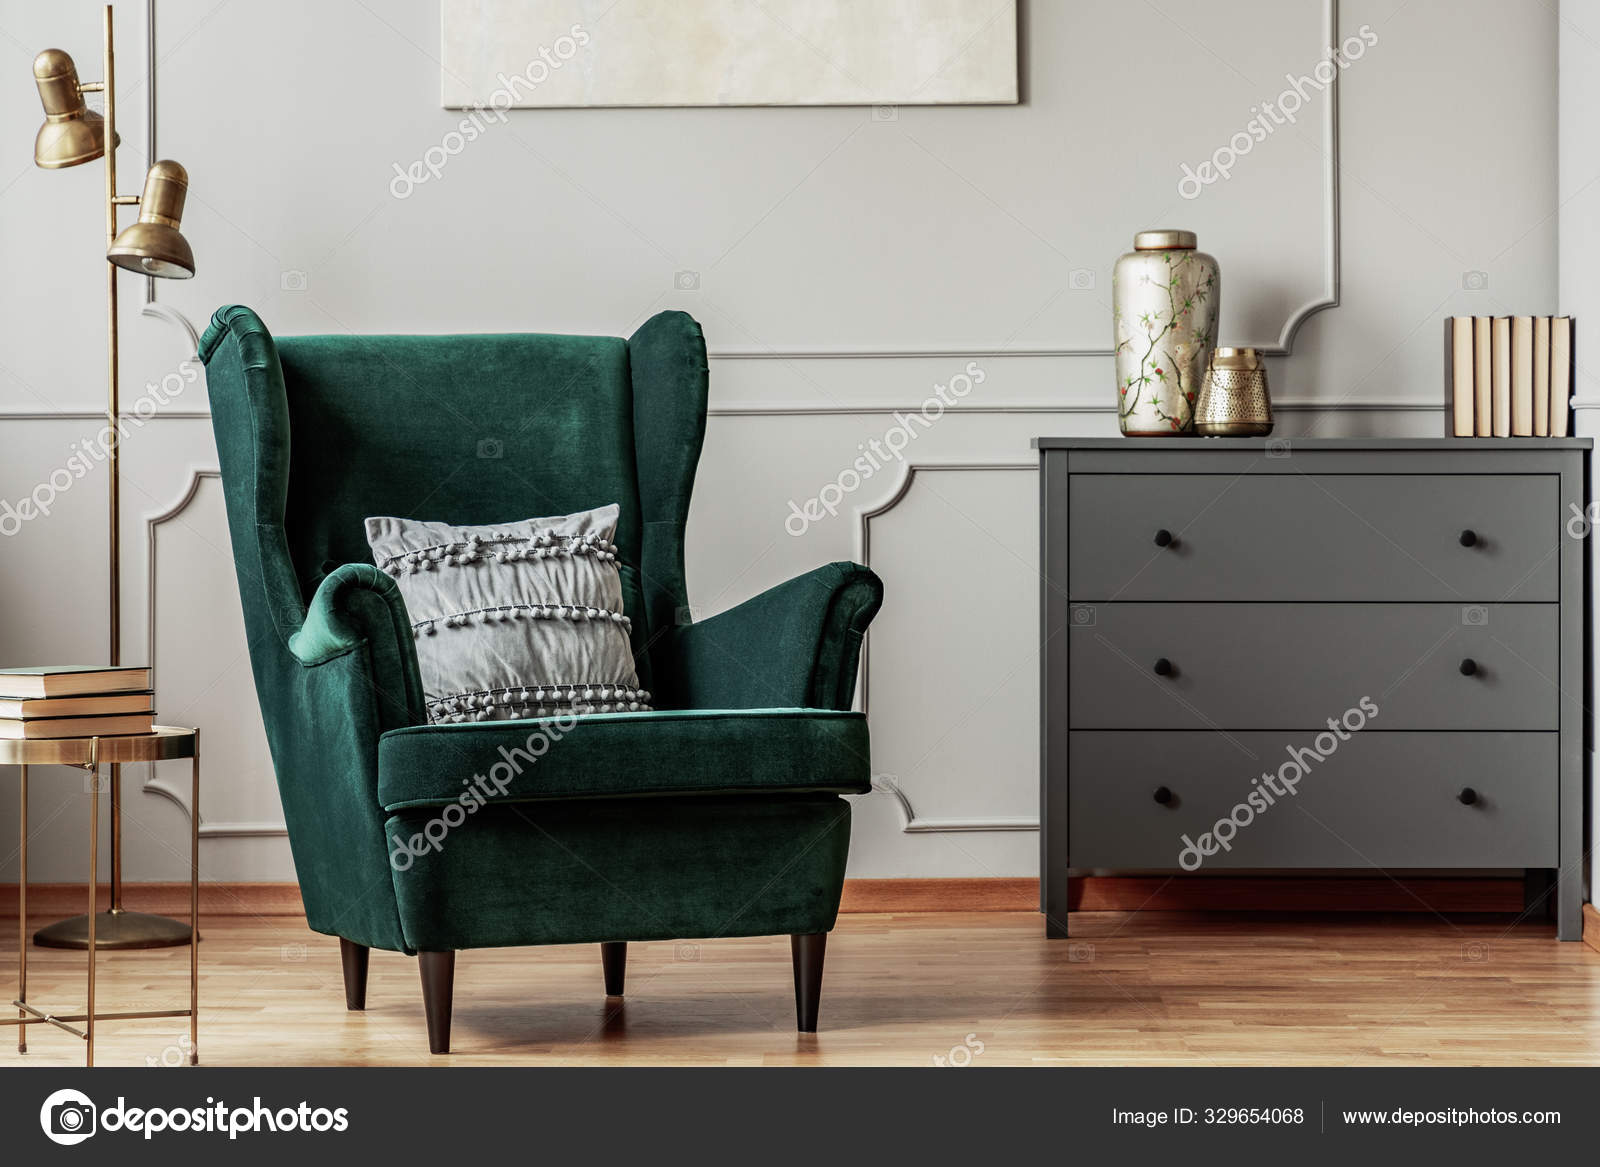 emerald green wing back chair with pillow in grey living room interior with  wooden commode 329654068